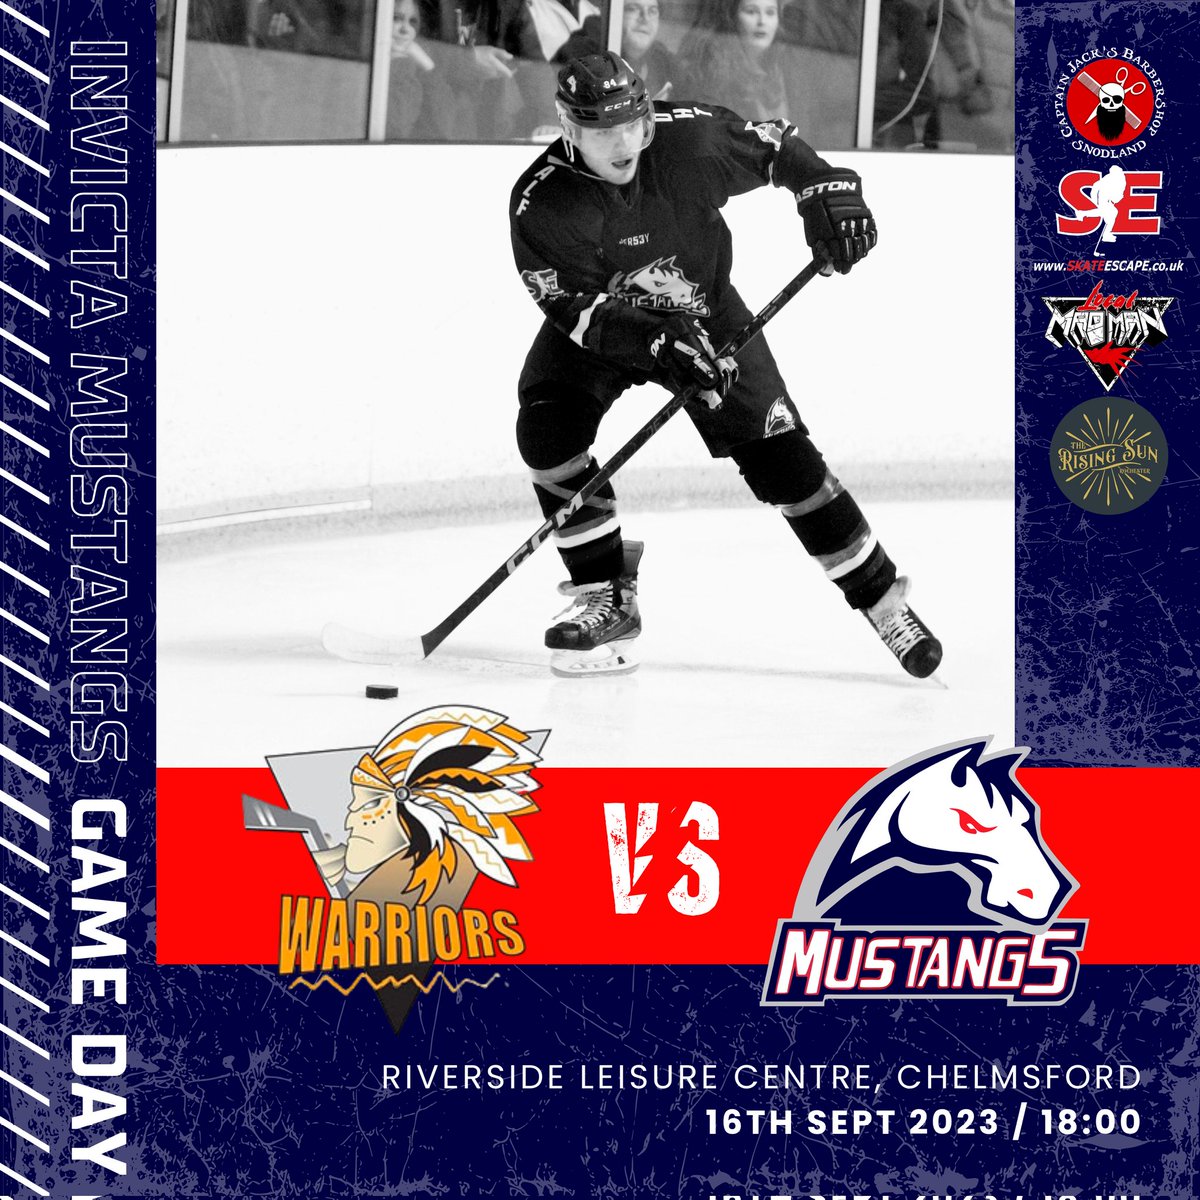 Mustang's are away to @WarriorsIHC this Saturday 16th September, face-off 6pm at the Riverside leisure centre. Let's get the season going!!! #Mustangsarmy